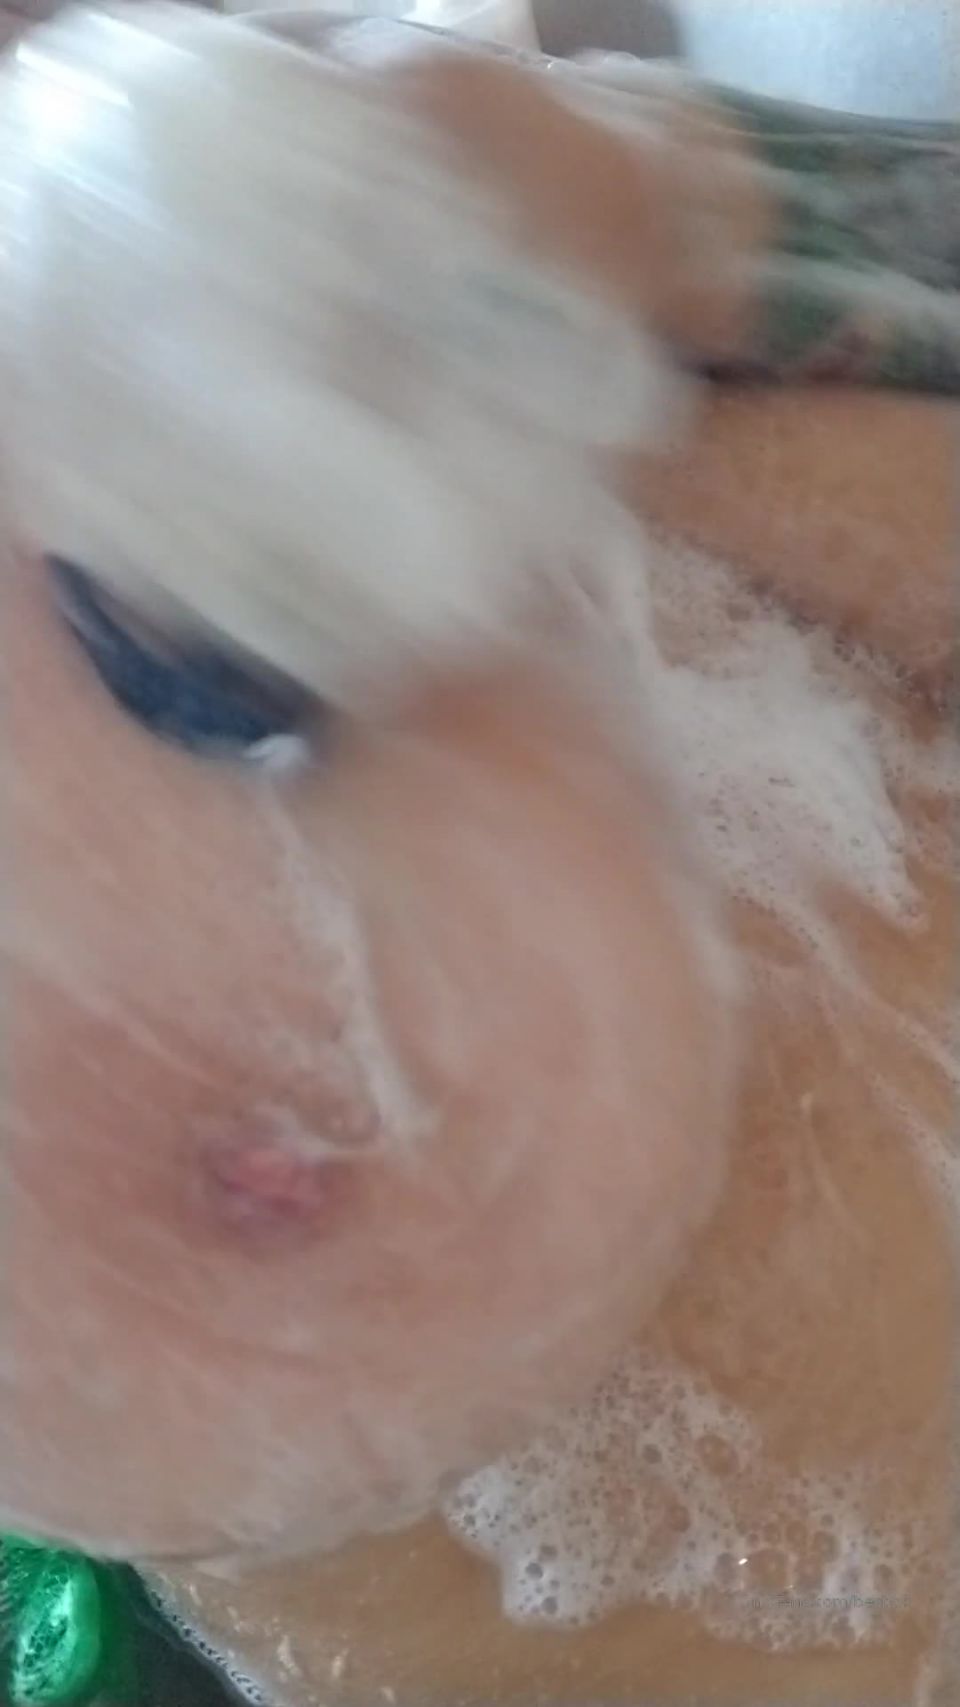 Onlyfans - Bexbb9 - Soapy bath time - 06-03-2020